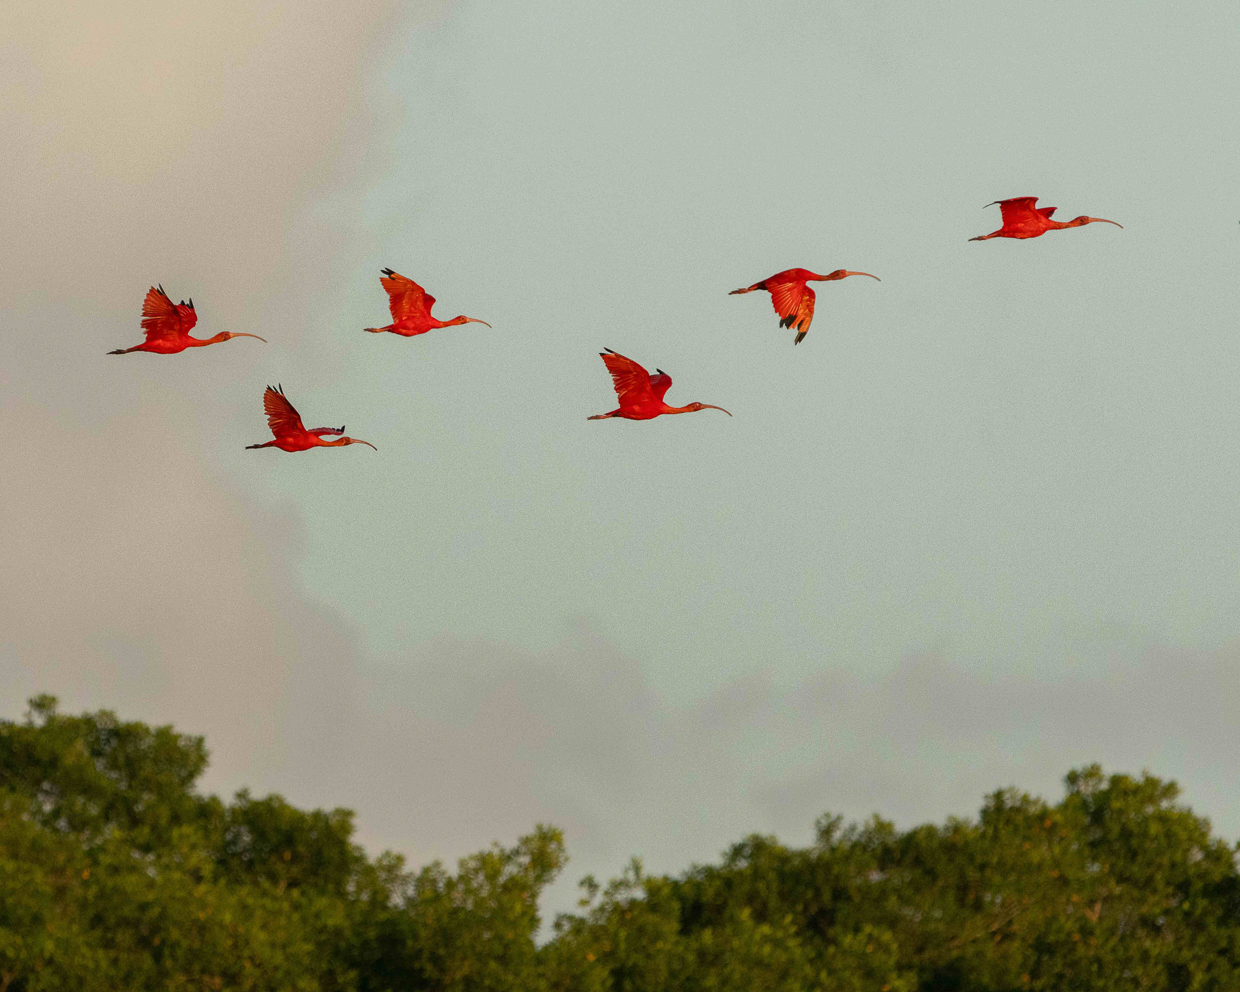 Scarlet Ibis coming to roost